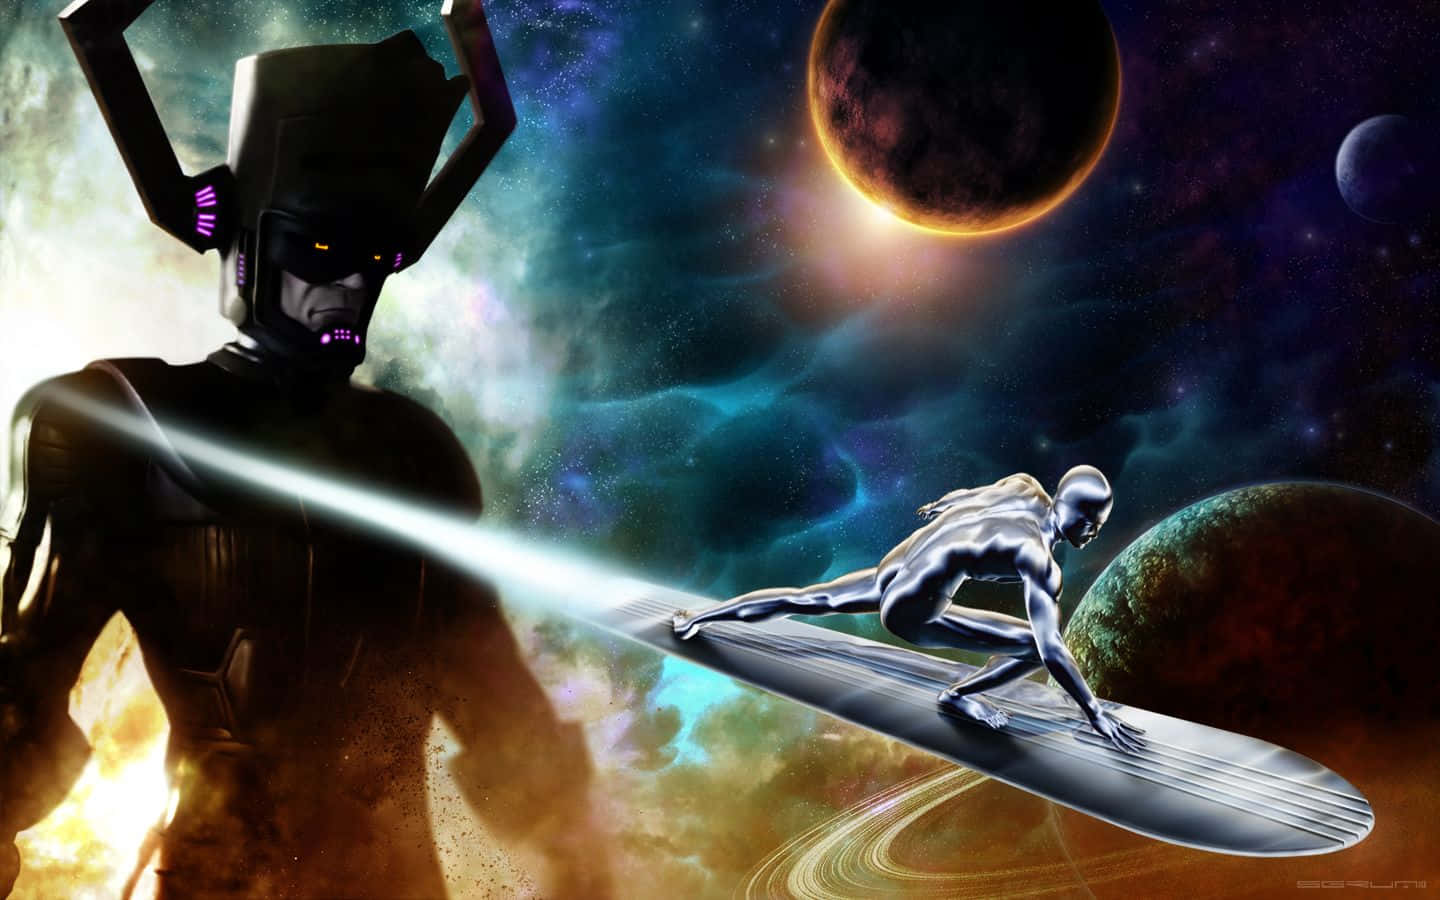 Marvel Silver Surfer in Space Wallpapers - Marvel Wallpapers 4k